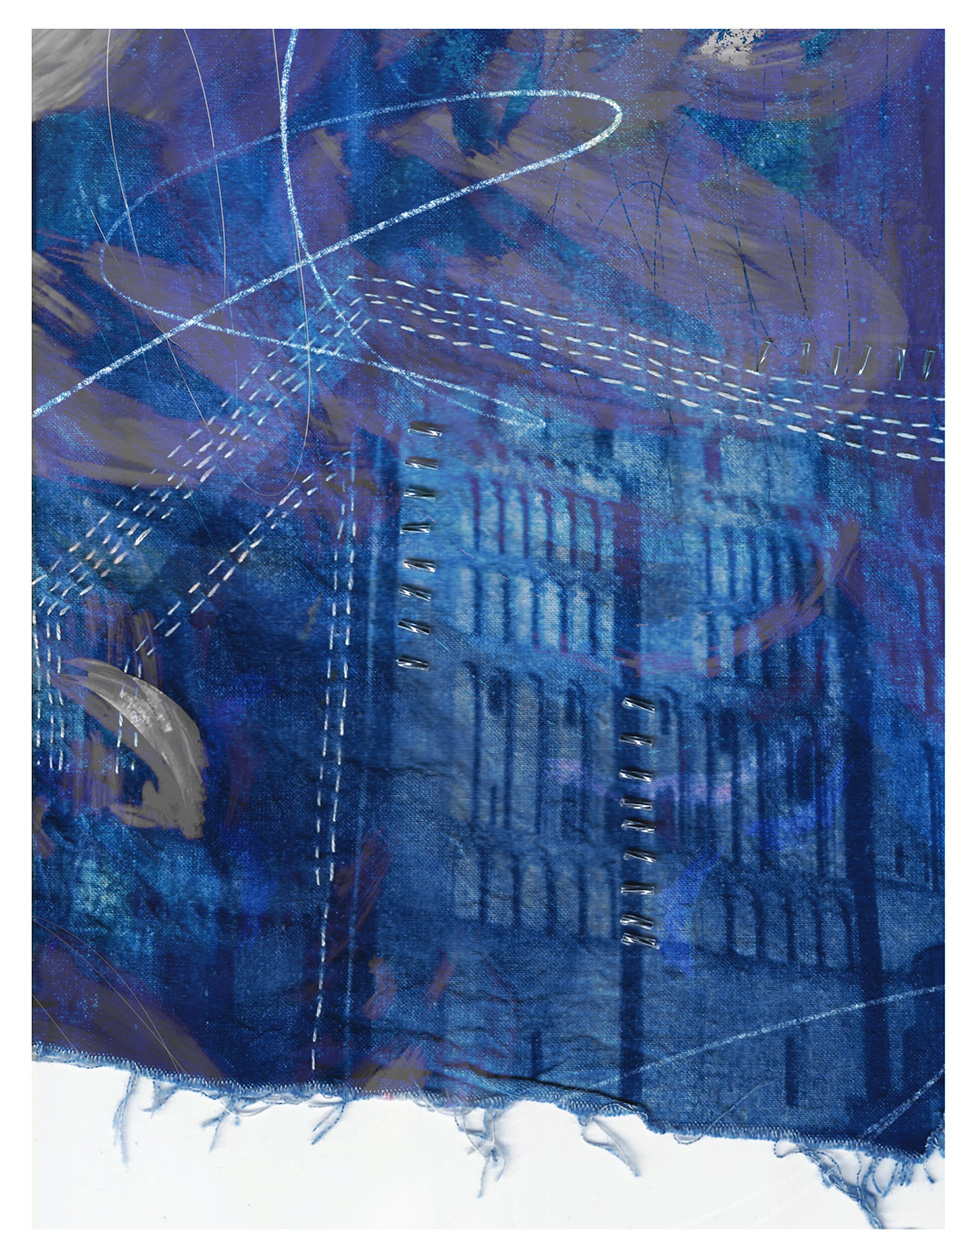 BA Illustration cyanotype print on fabric by Madeleine Bullingham depicting Norwich castle with hand stitched details.